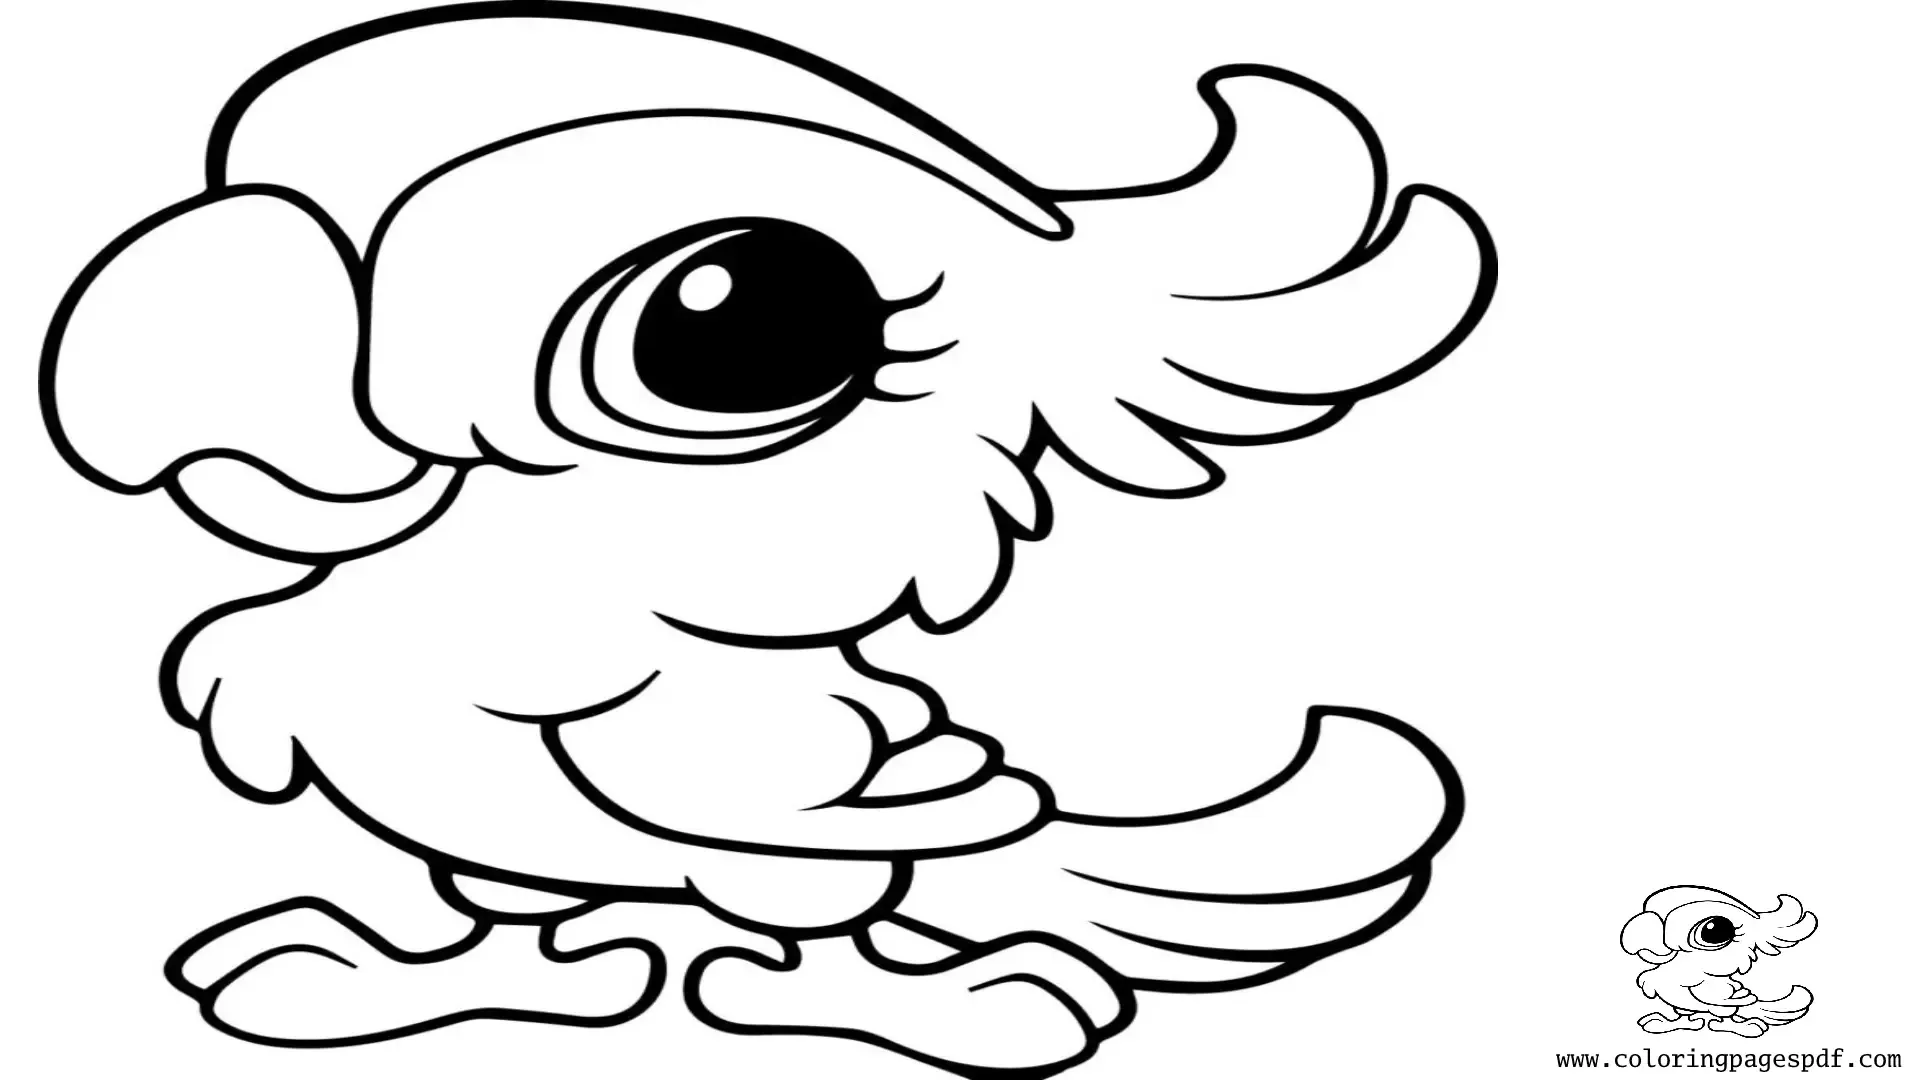 Coloring Page Of A Baby Parrot